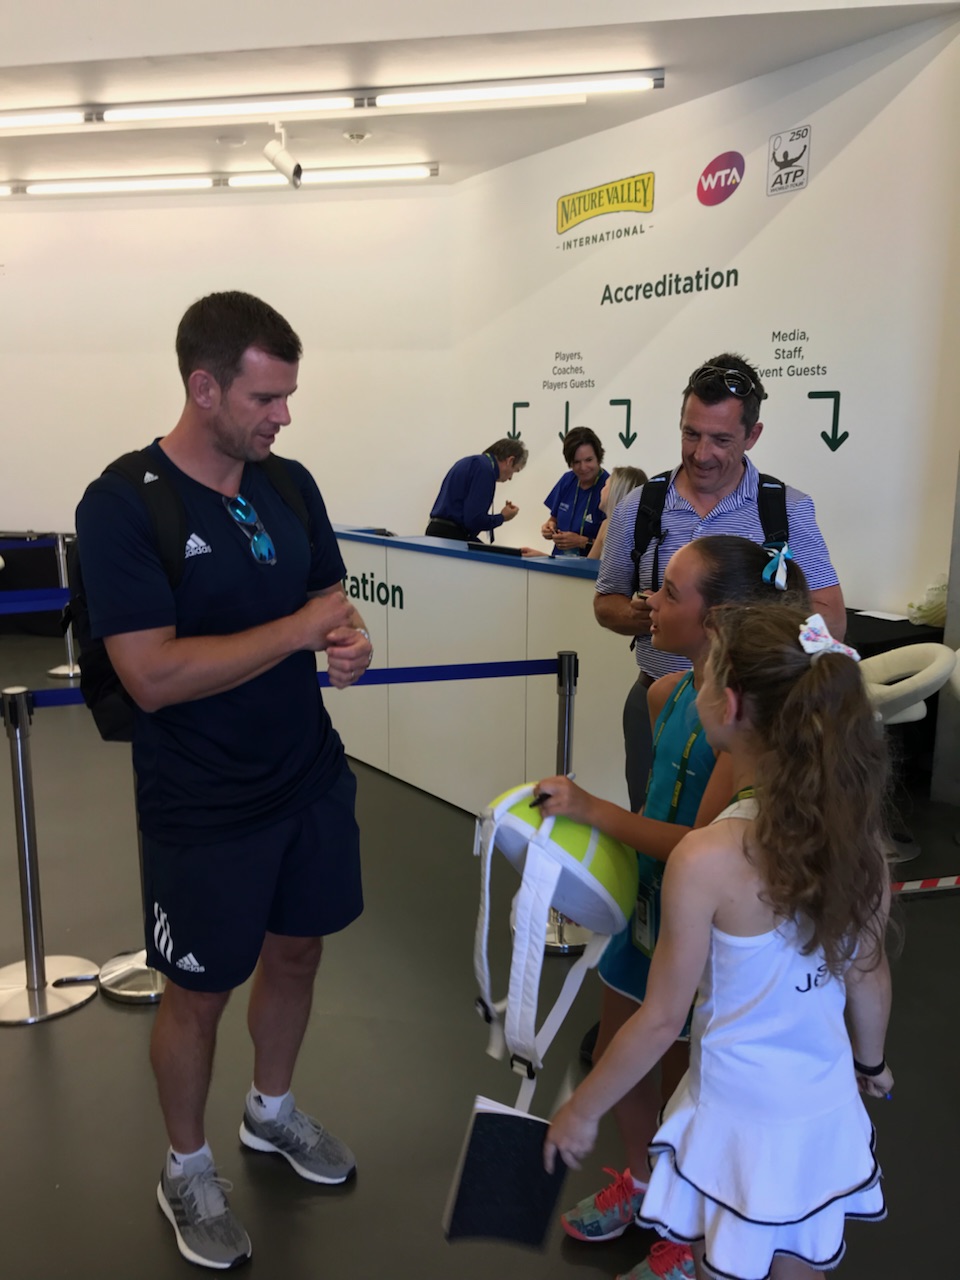 Elena Baltacha Foundation girls with Great Britain Davis Cup captain Leon Smith at the Nature Valley International in Eastbourne.